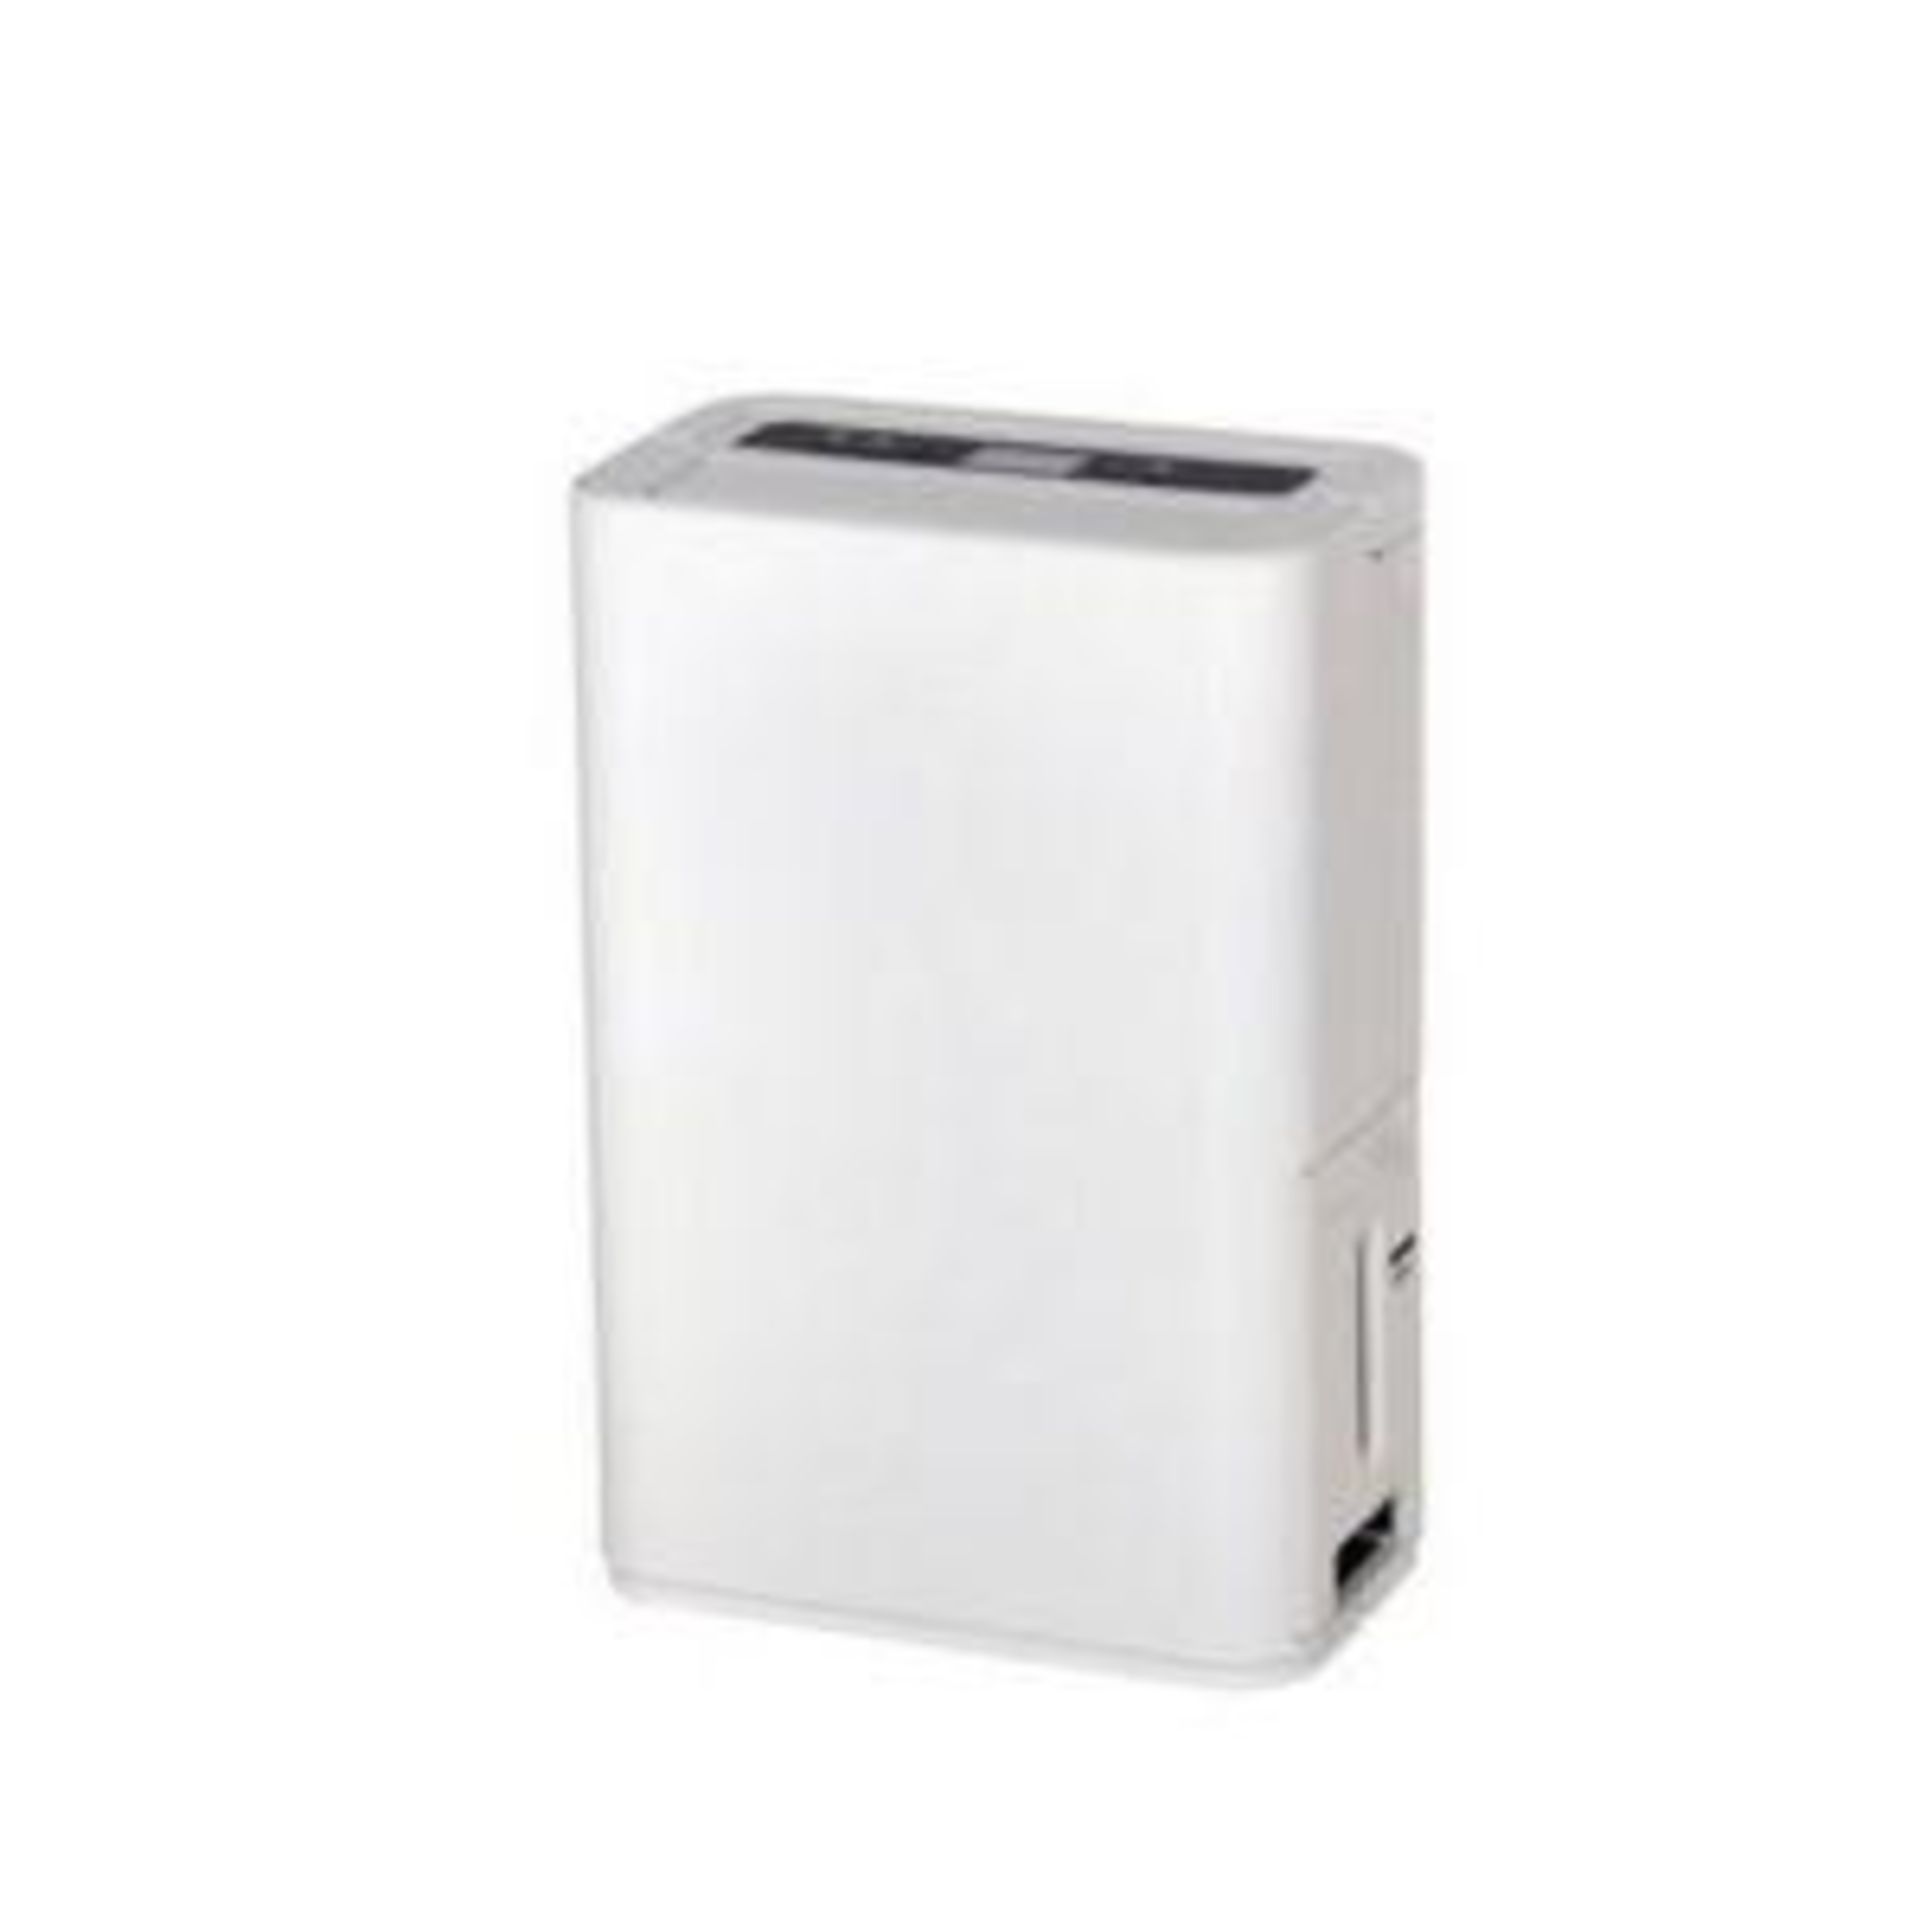 Blyss Corded Electric Dehumidifier 2 Speed WDH-316DB 16Ltr 280W 240V - SR46. Ideal for removing - Image 2 of 2